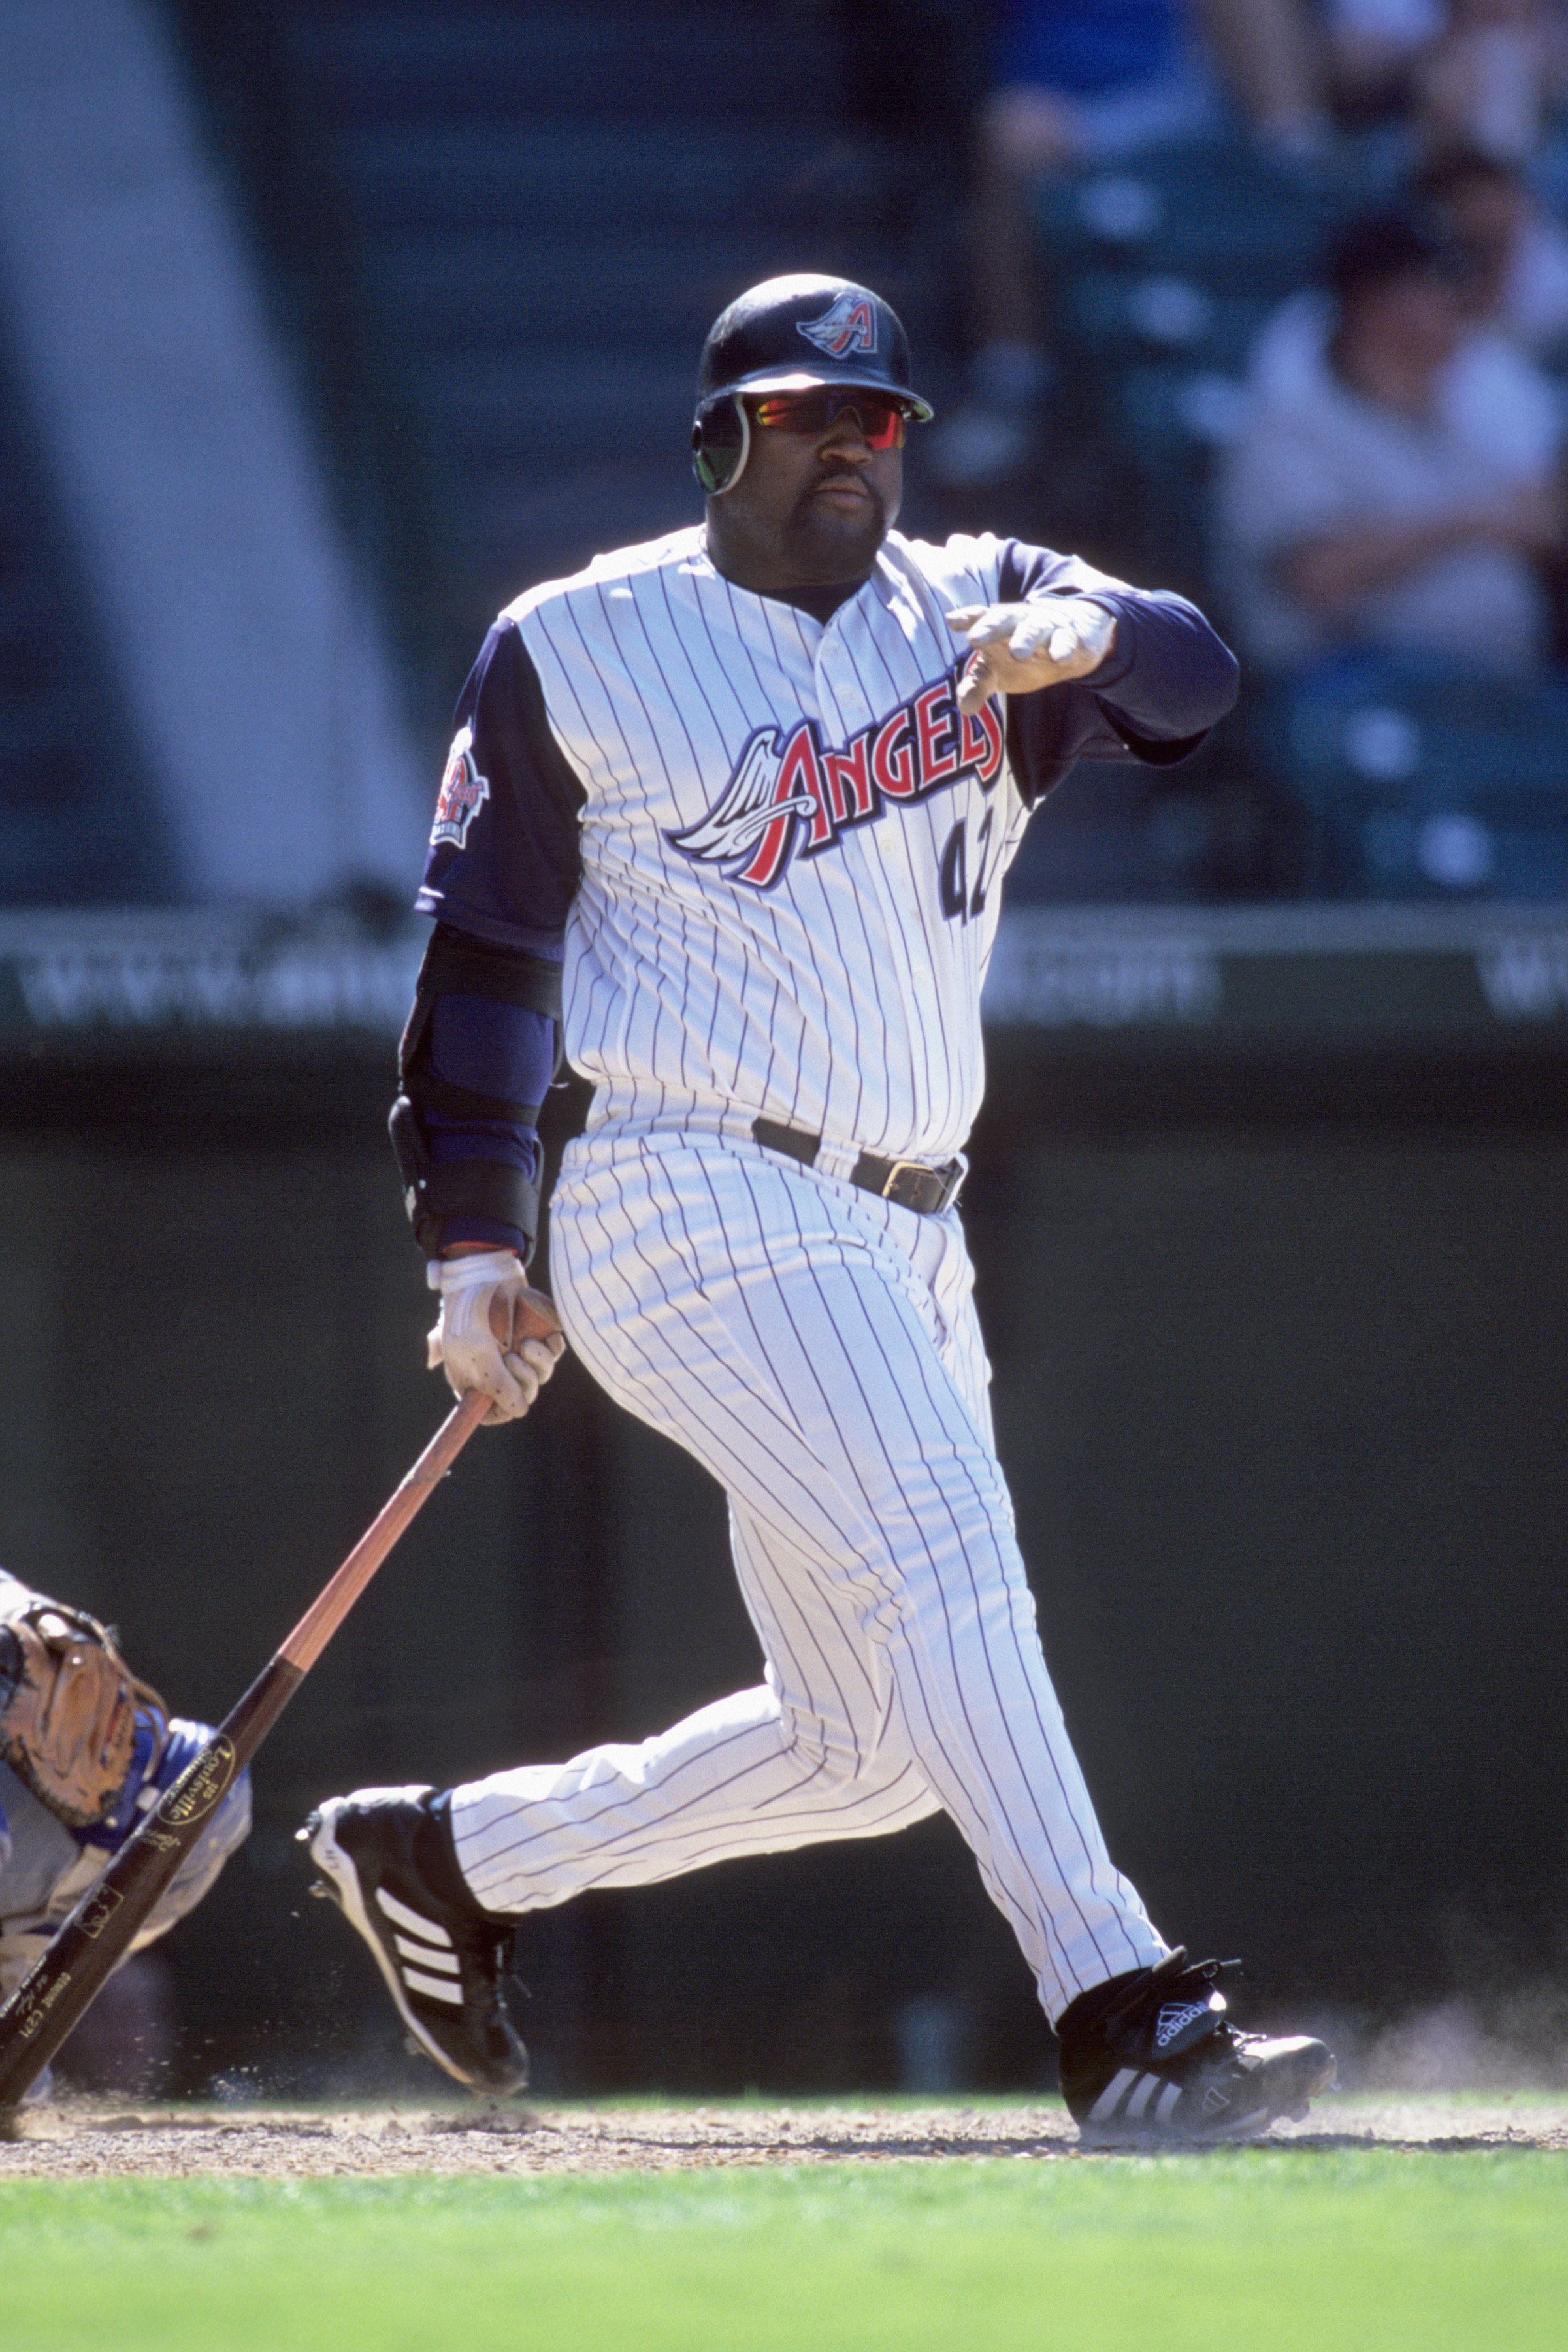 ANAHEIM, CA - JUNE 3:  Mo Vaughn #42 of the Anaheim Angels bats during the game against the Los Angeles Dodgers at Edison International Field on June 3, 2000 in Anaheim, California. (Photo by Harry How/Getty Images)